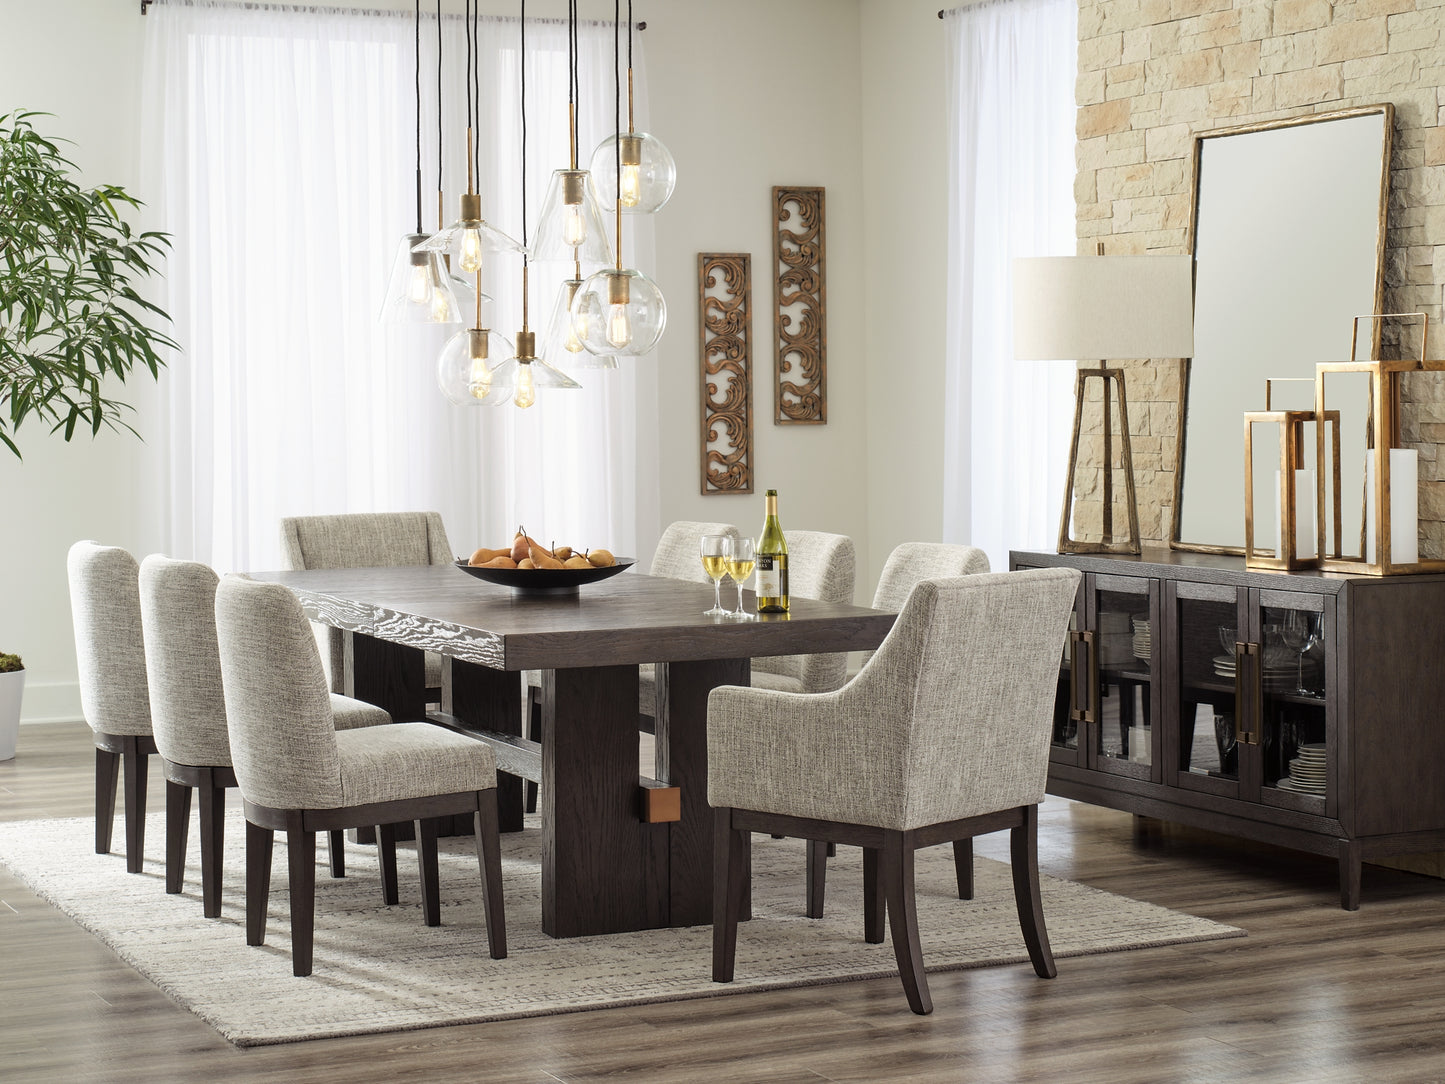 Burkhaus Dining Table and 8 Chairs JB's Furniture  Home Furniture, Home Decor, Furniture Store